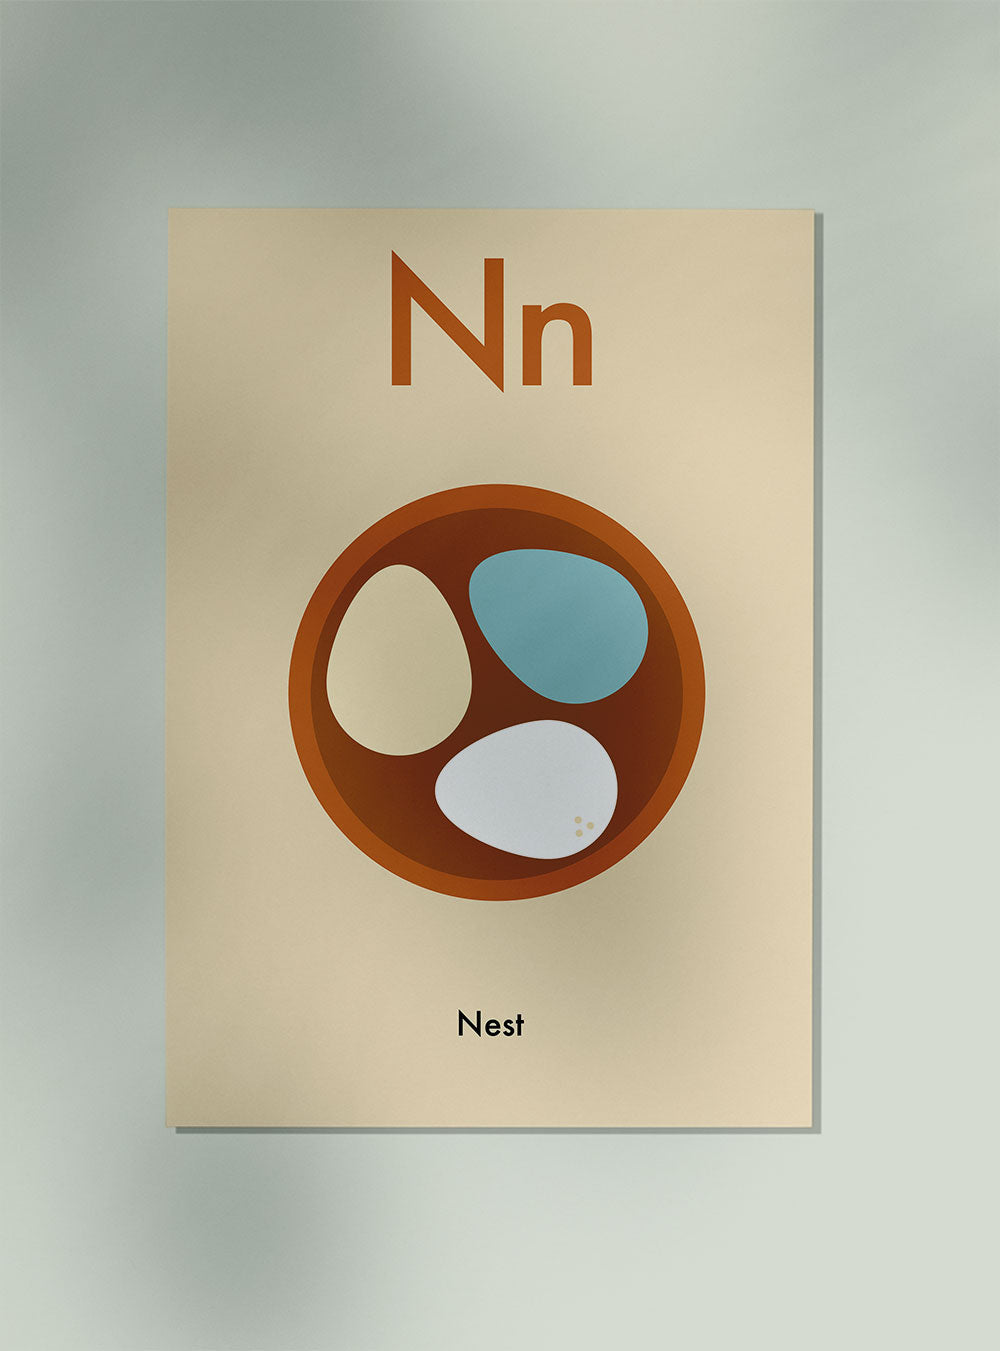 N for Nest - Children's Alphabet Poster in German and English